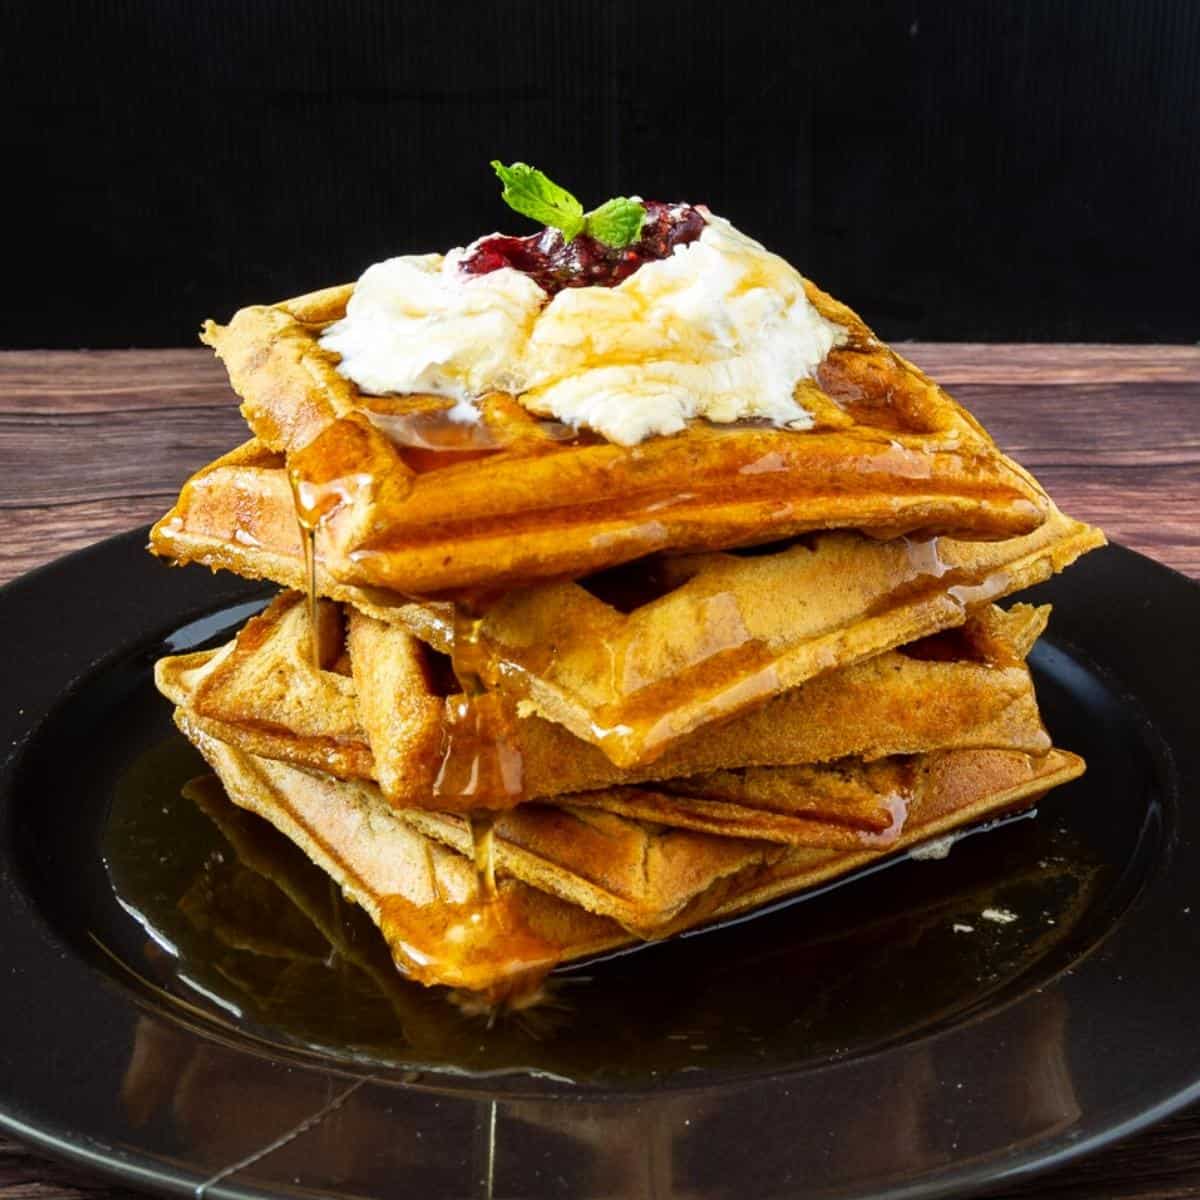 A stack of waffles on a plate with whipped cream.